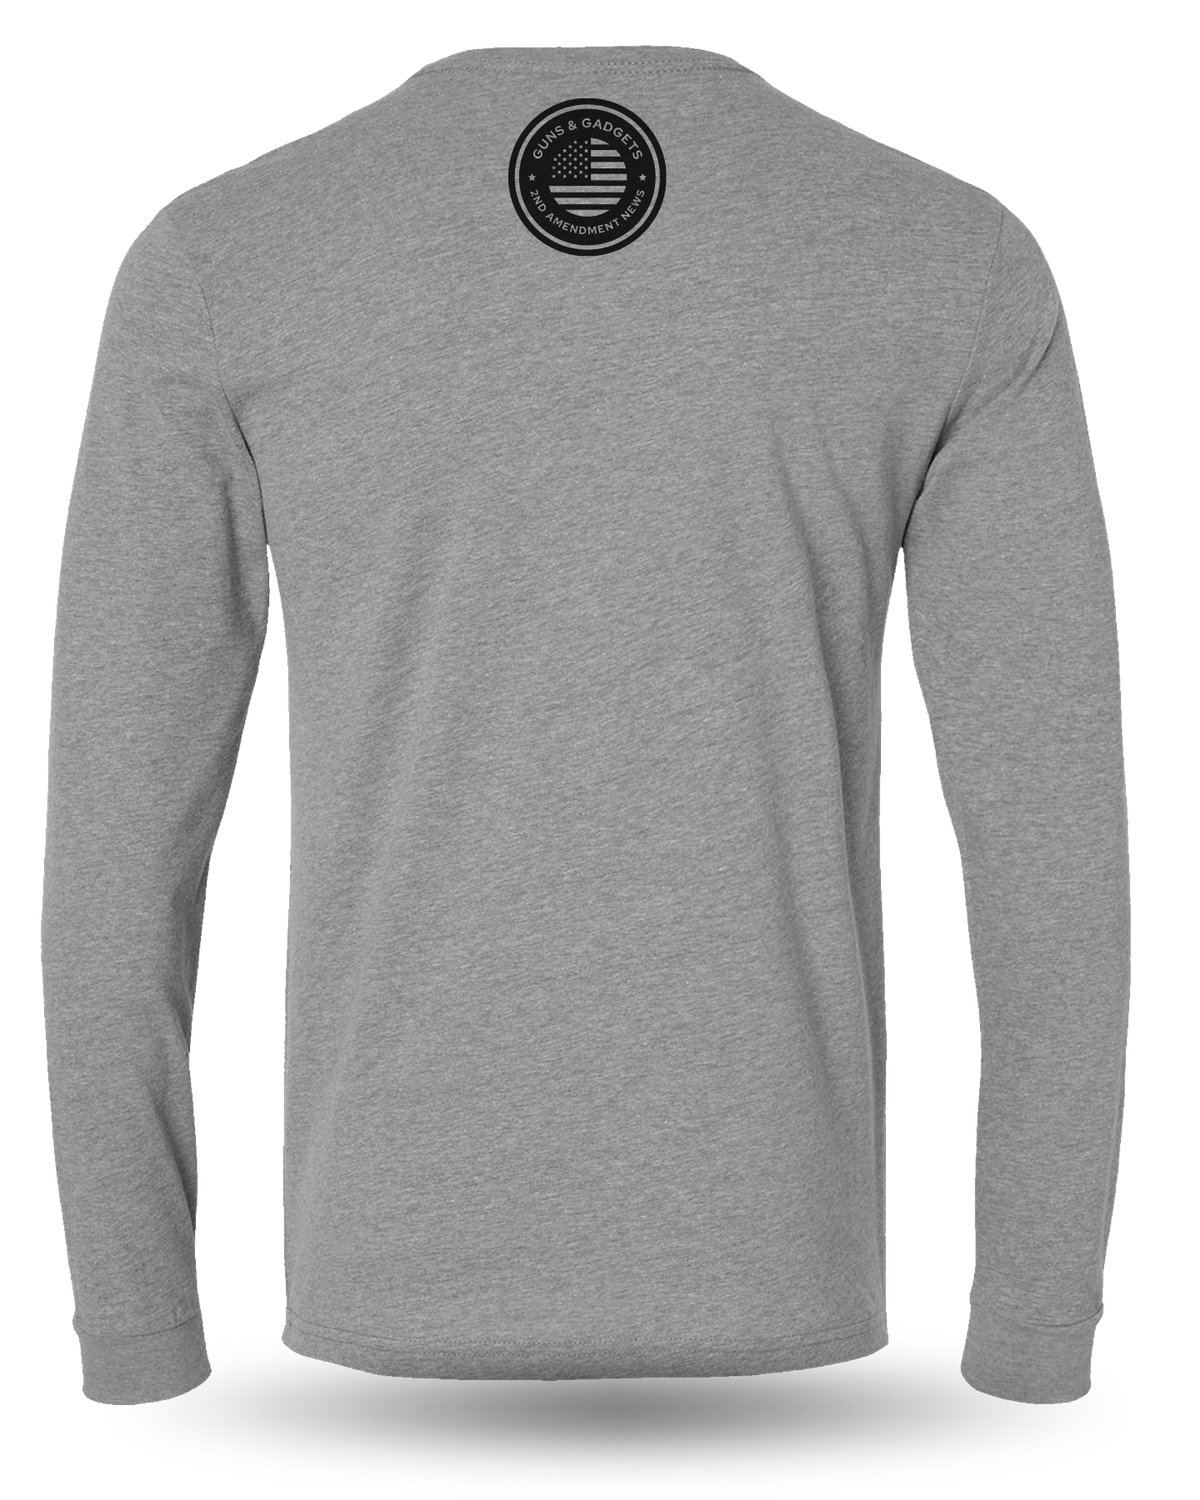 WE THE PEOPLE LONG SLEEVE - TriStar Trading Co.